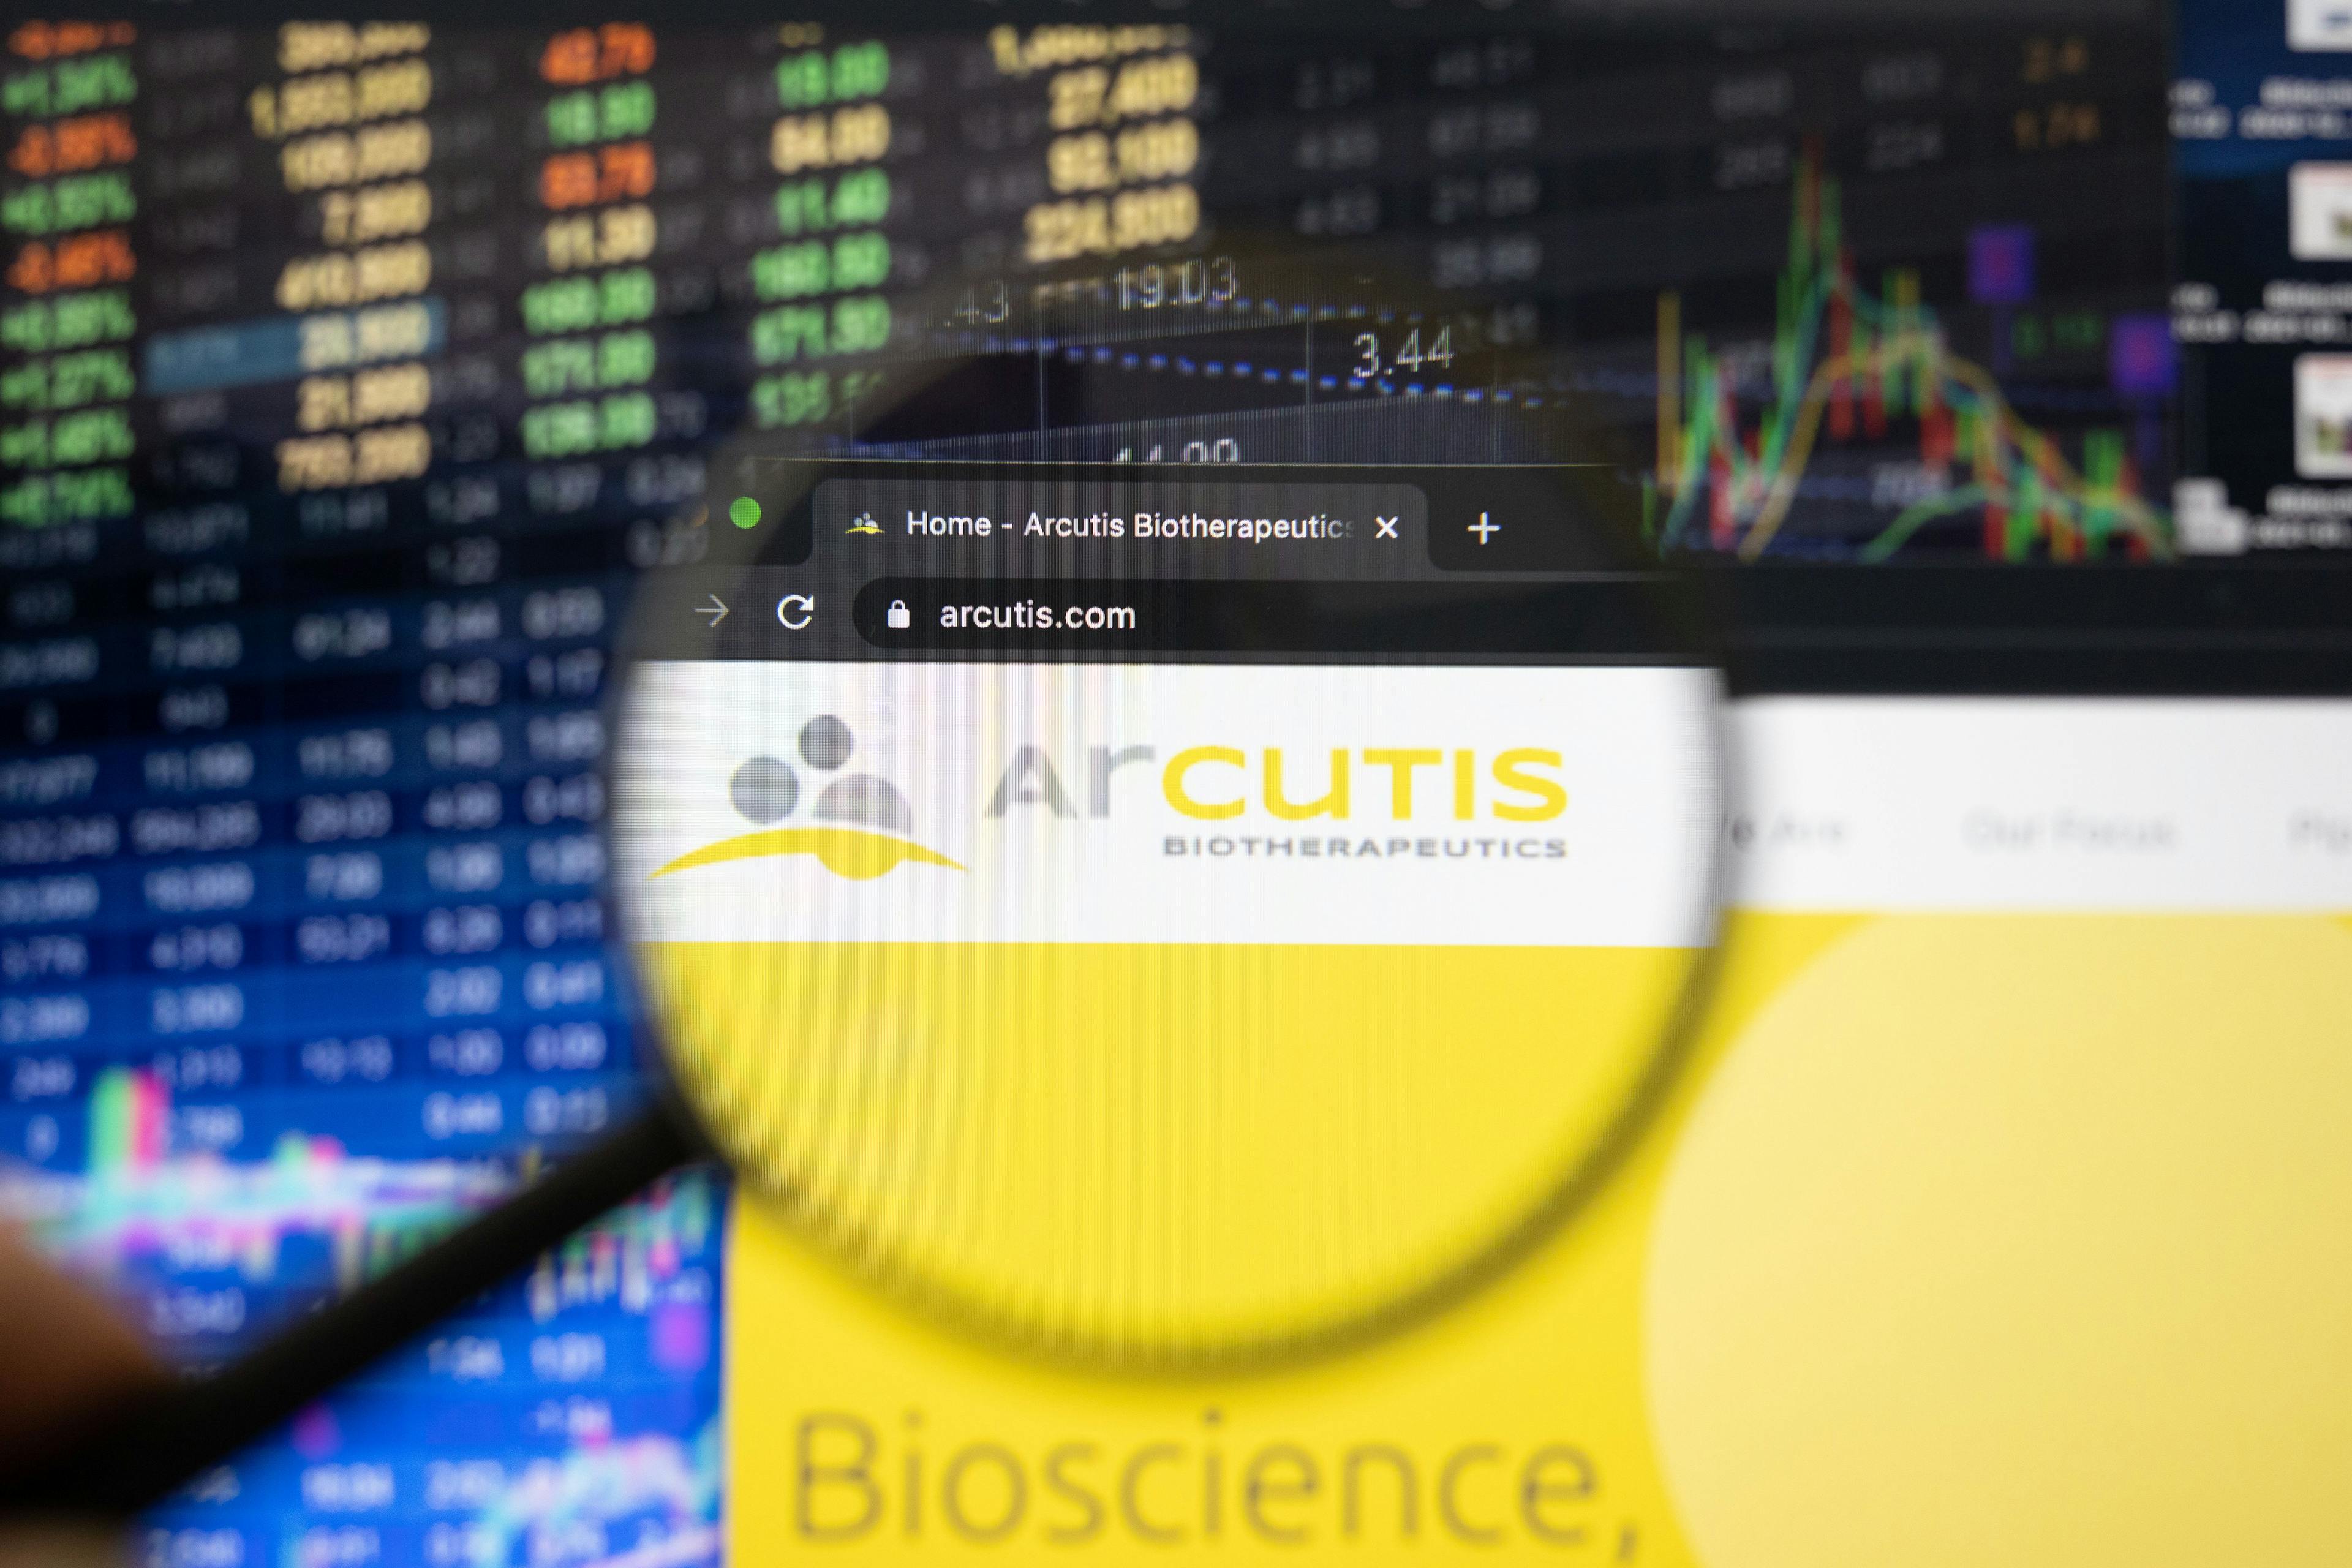 In Japan, Arcutis and Sato Enter Strategic Collaboration and Licensing Agreement for Topical Roflumilast